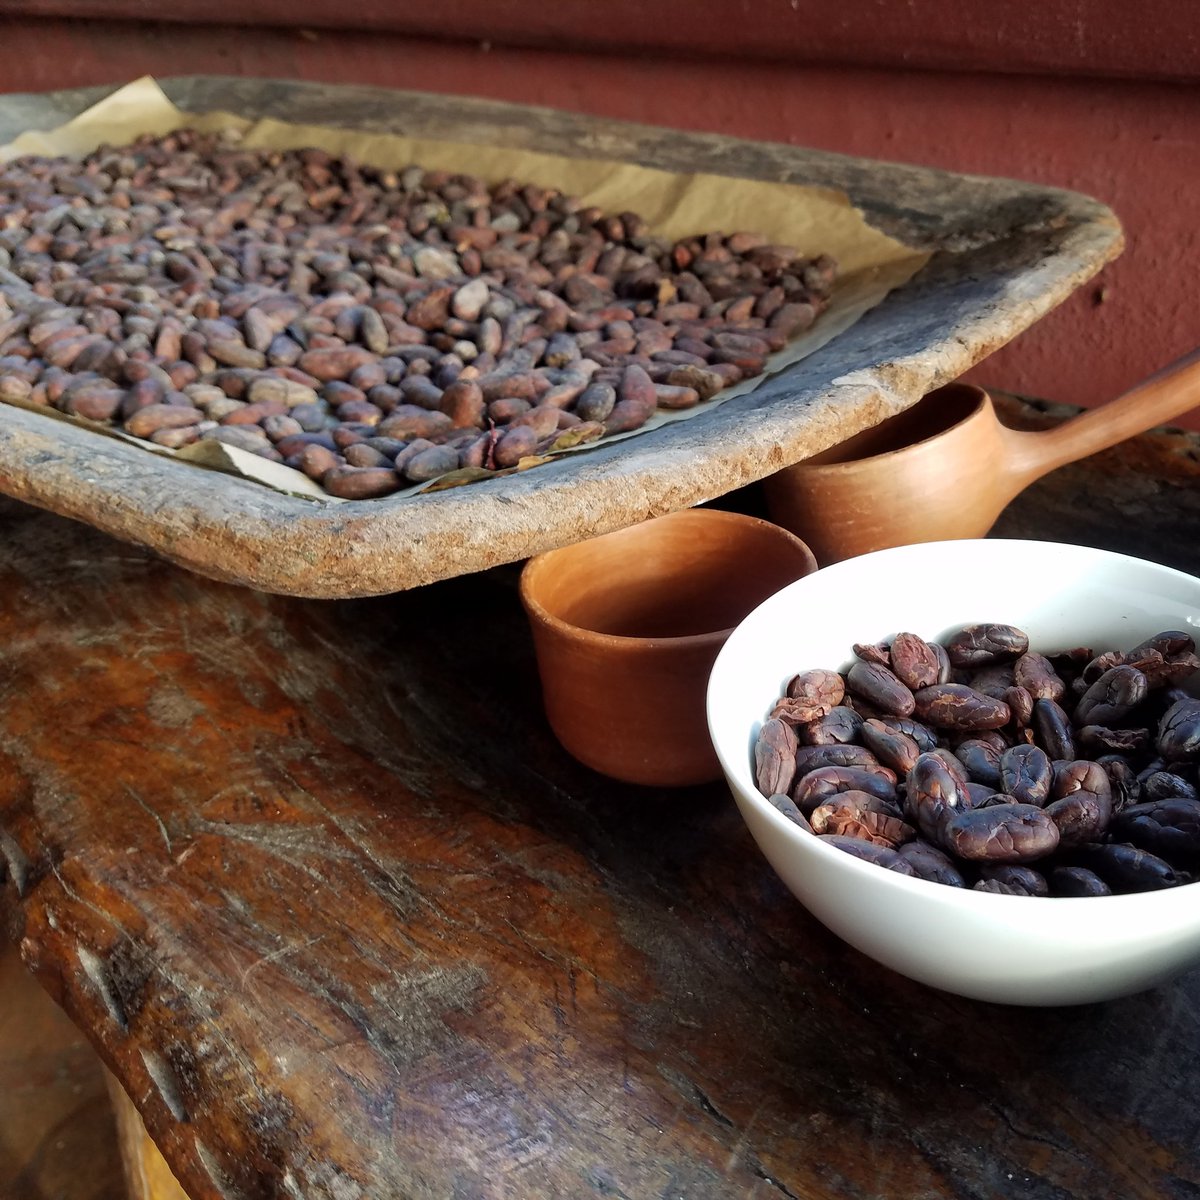 A Honduran cacao farm tour and on-site chocolate tasting is a delicious experience #honduras #chocolate #chocolatetour #visithonduras #agritourism #choosehonduras